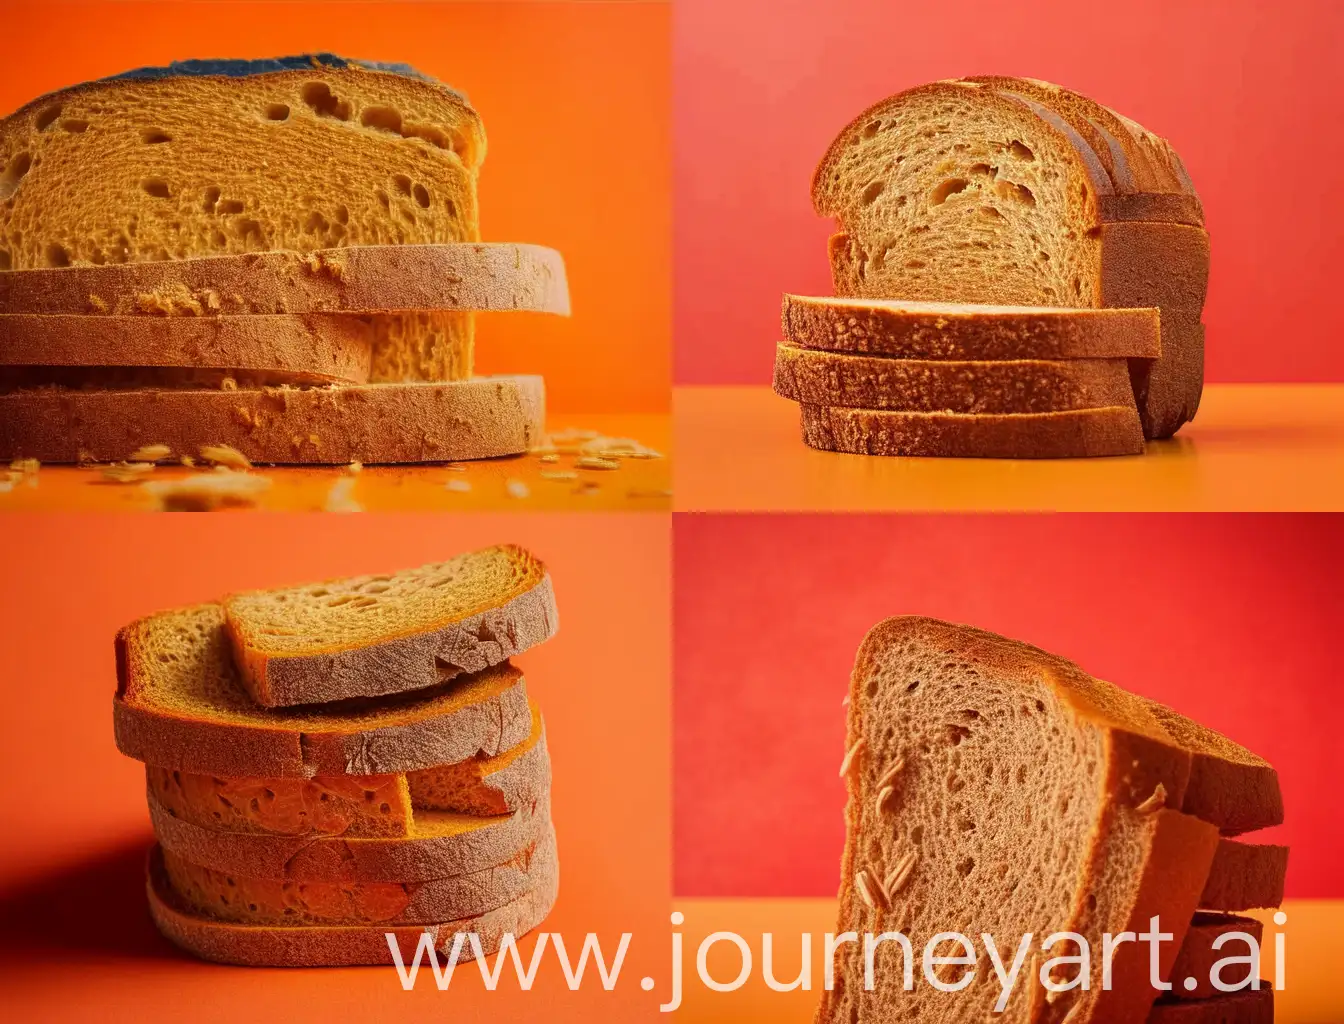 A photorealistic image of a loaf of whole wheat bread, sliced and stacked, placed in the center of the frame against a vibrant orange background. The focus should be sharp on the bread, capturing the intricate details of the crust and the soft, fluffy texture of the slices. The orange background should complement the warm tones of the bread, creating a visually appealing contrast.
